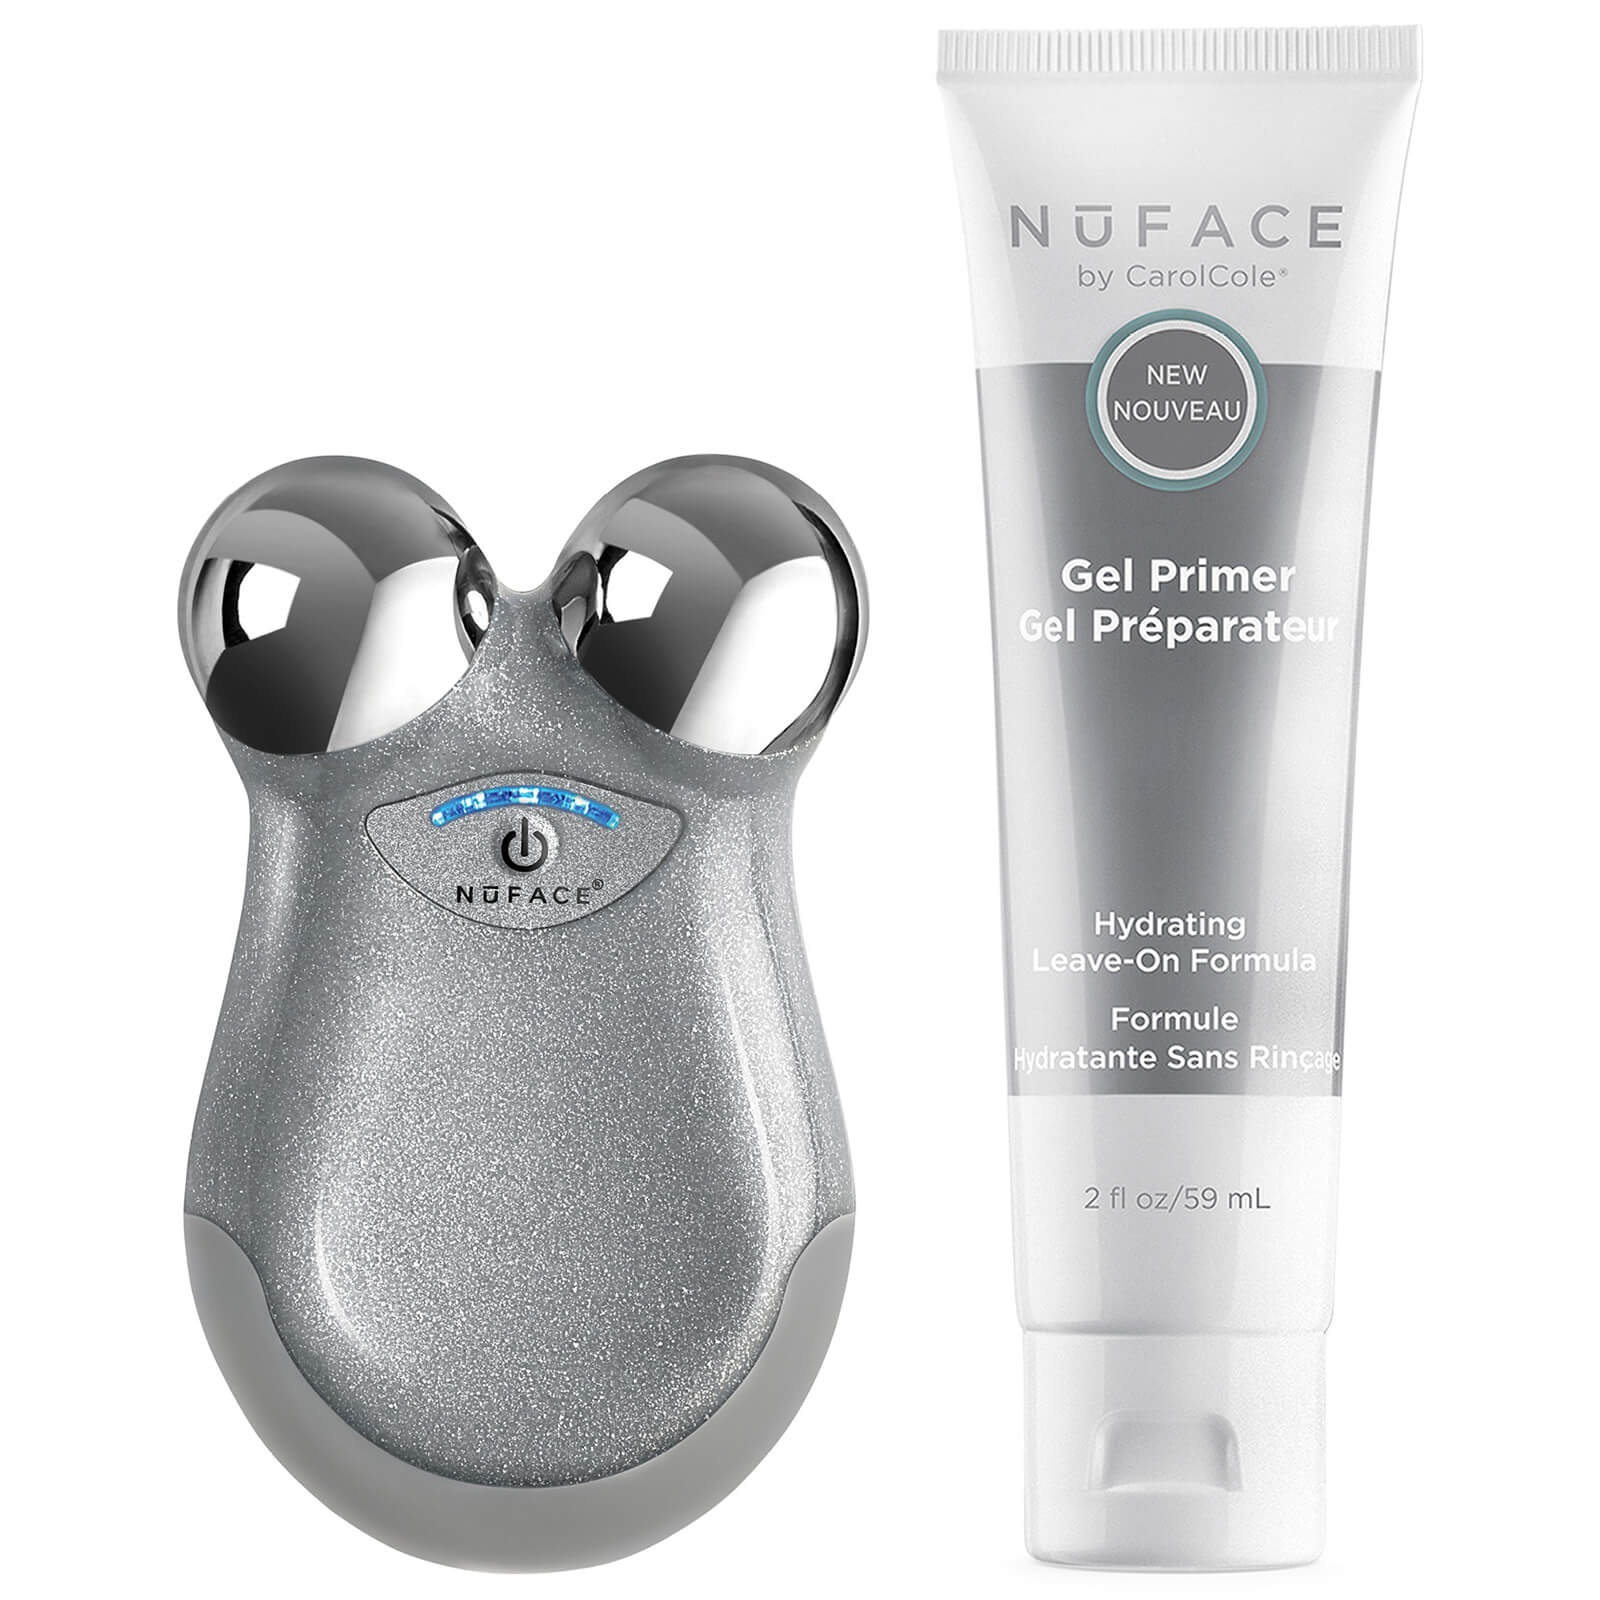 BEAUTY EXPERT UK: 15% OFF NuFACE Mini Device in Limited-Edition Platinum Colour